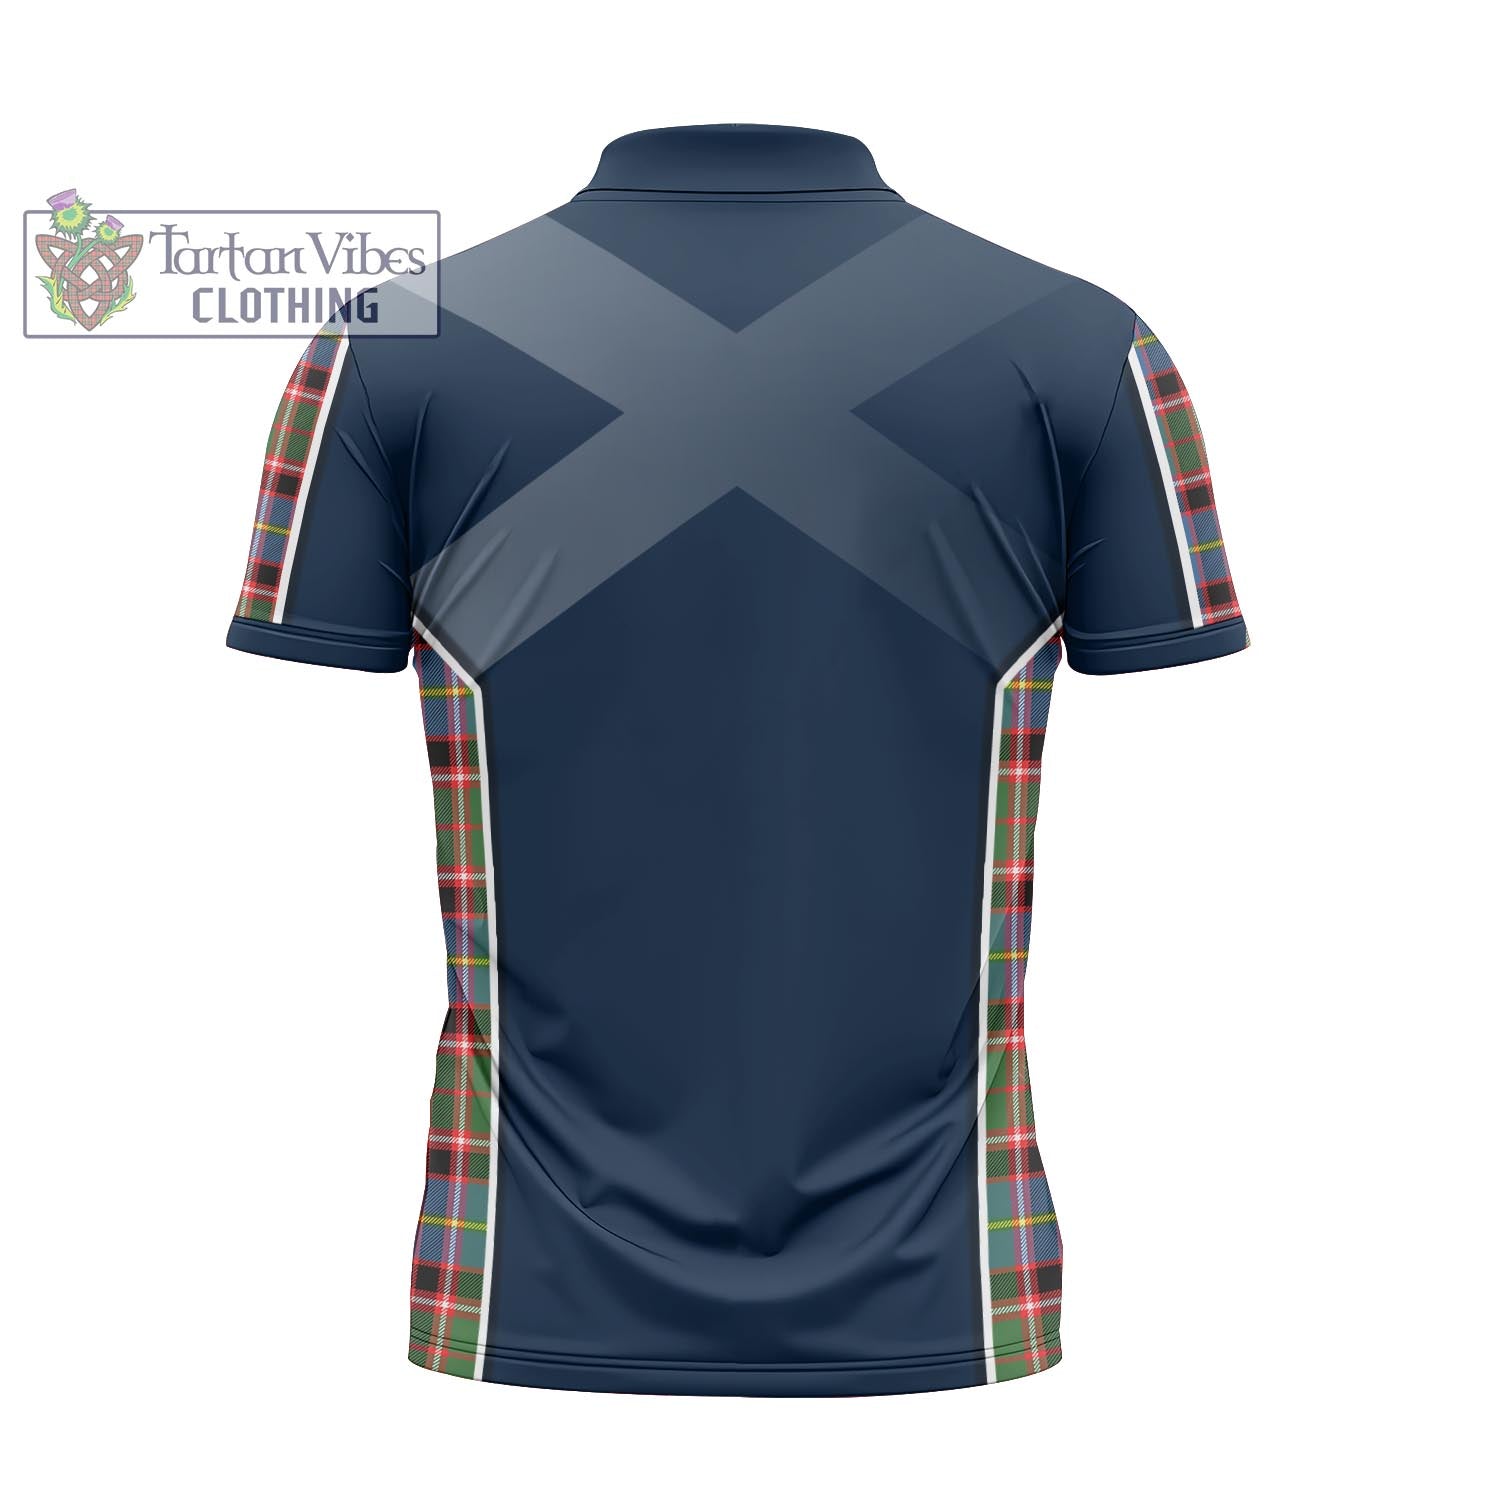 Tartan Vibes Clothing Stirling Bannockburn Tartan Zipper Polo Shirt with Family Crest and Lion Rampant Vibes Sport Style